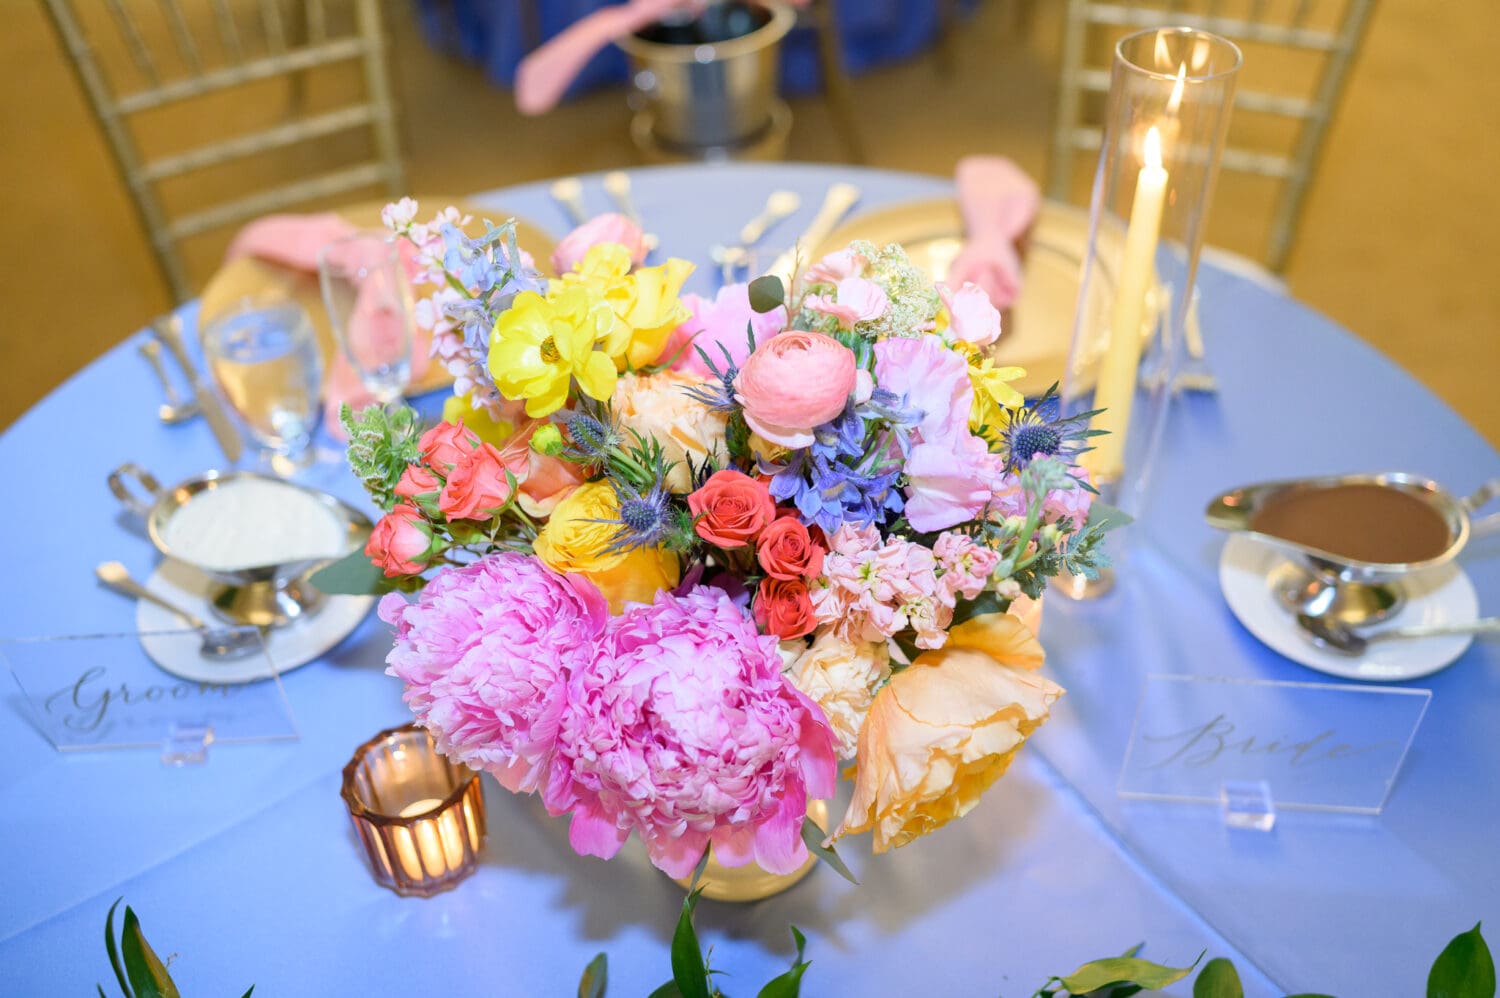 Flowers on the table - Pawleys Plantation Golf & Country Club